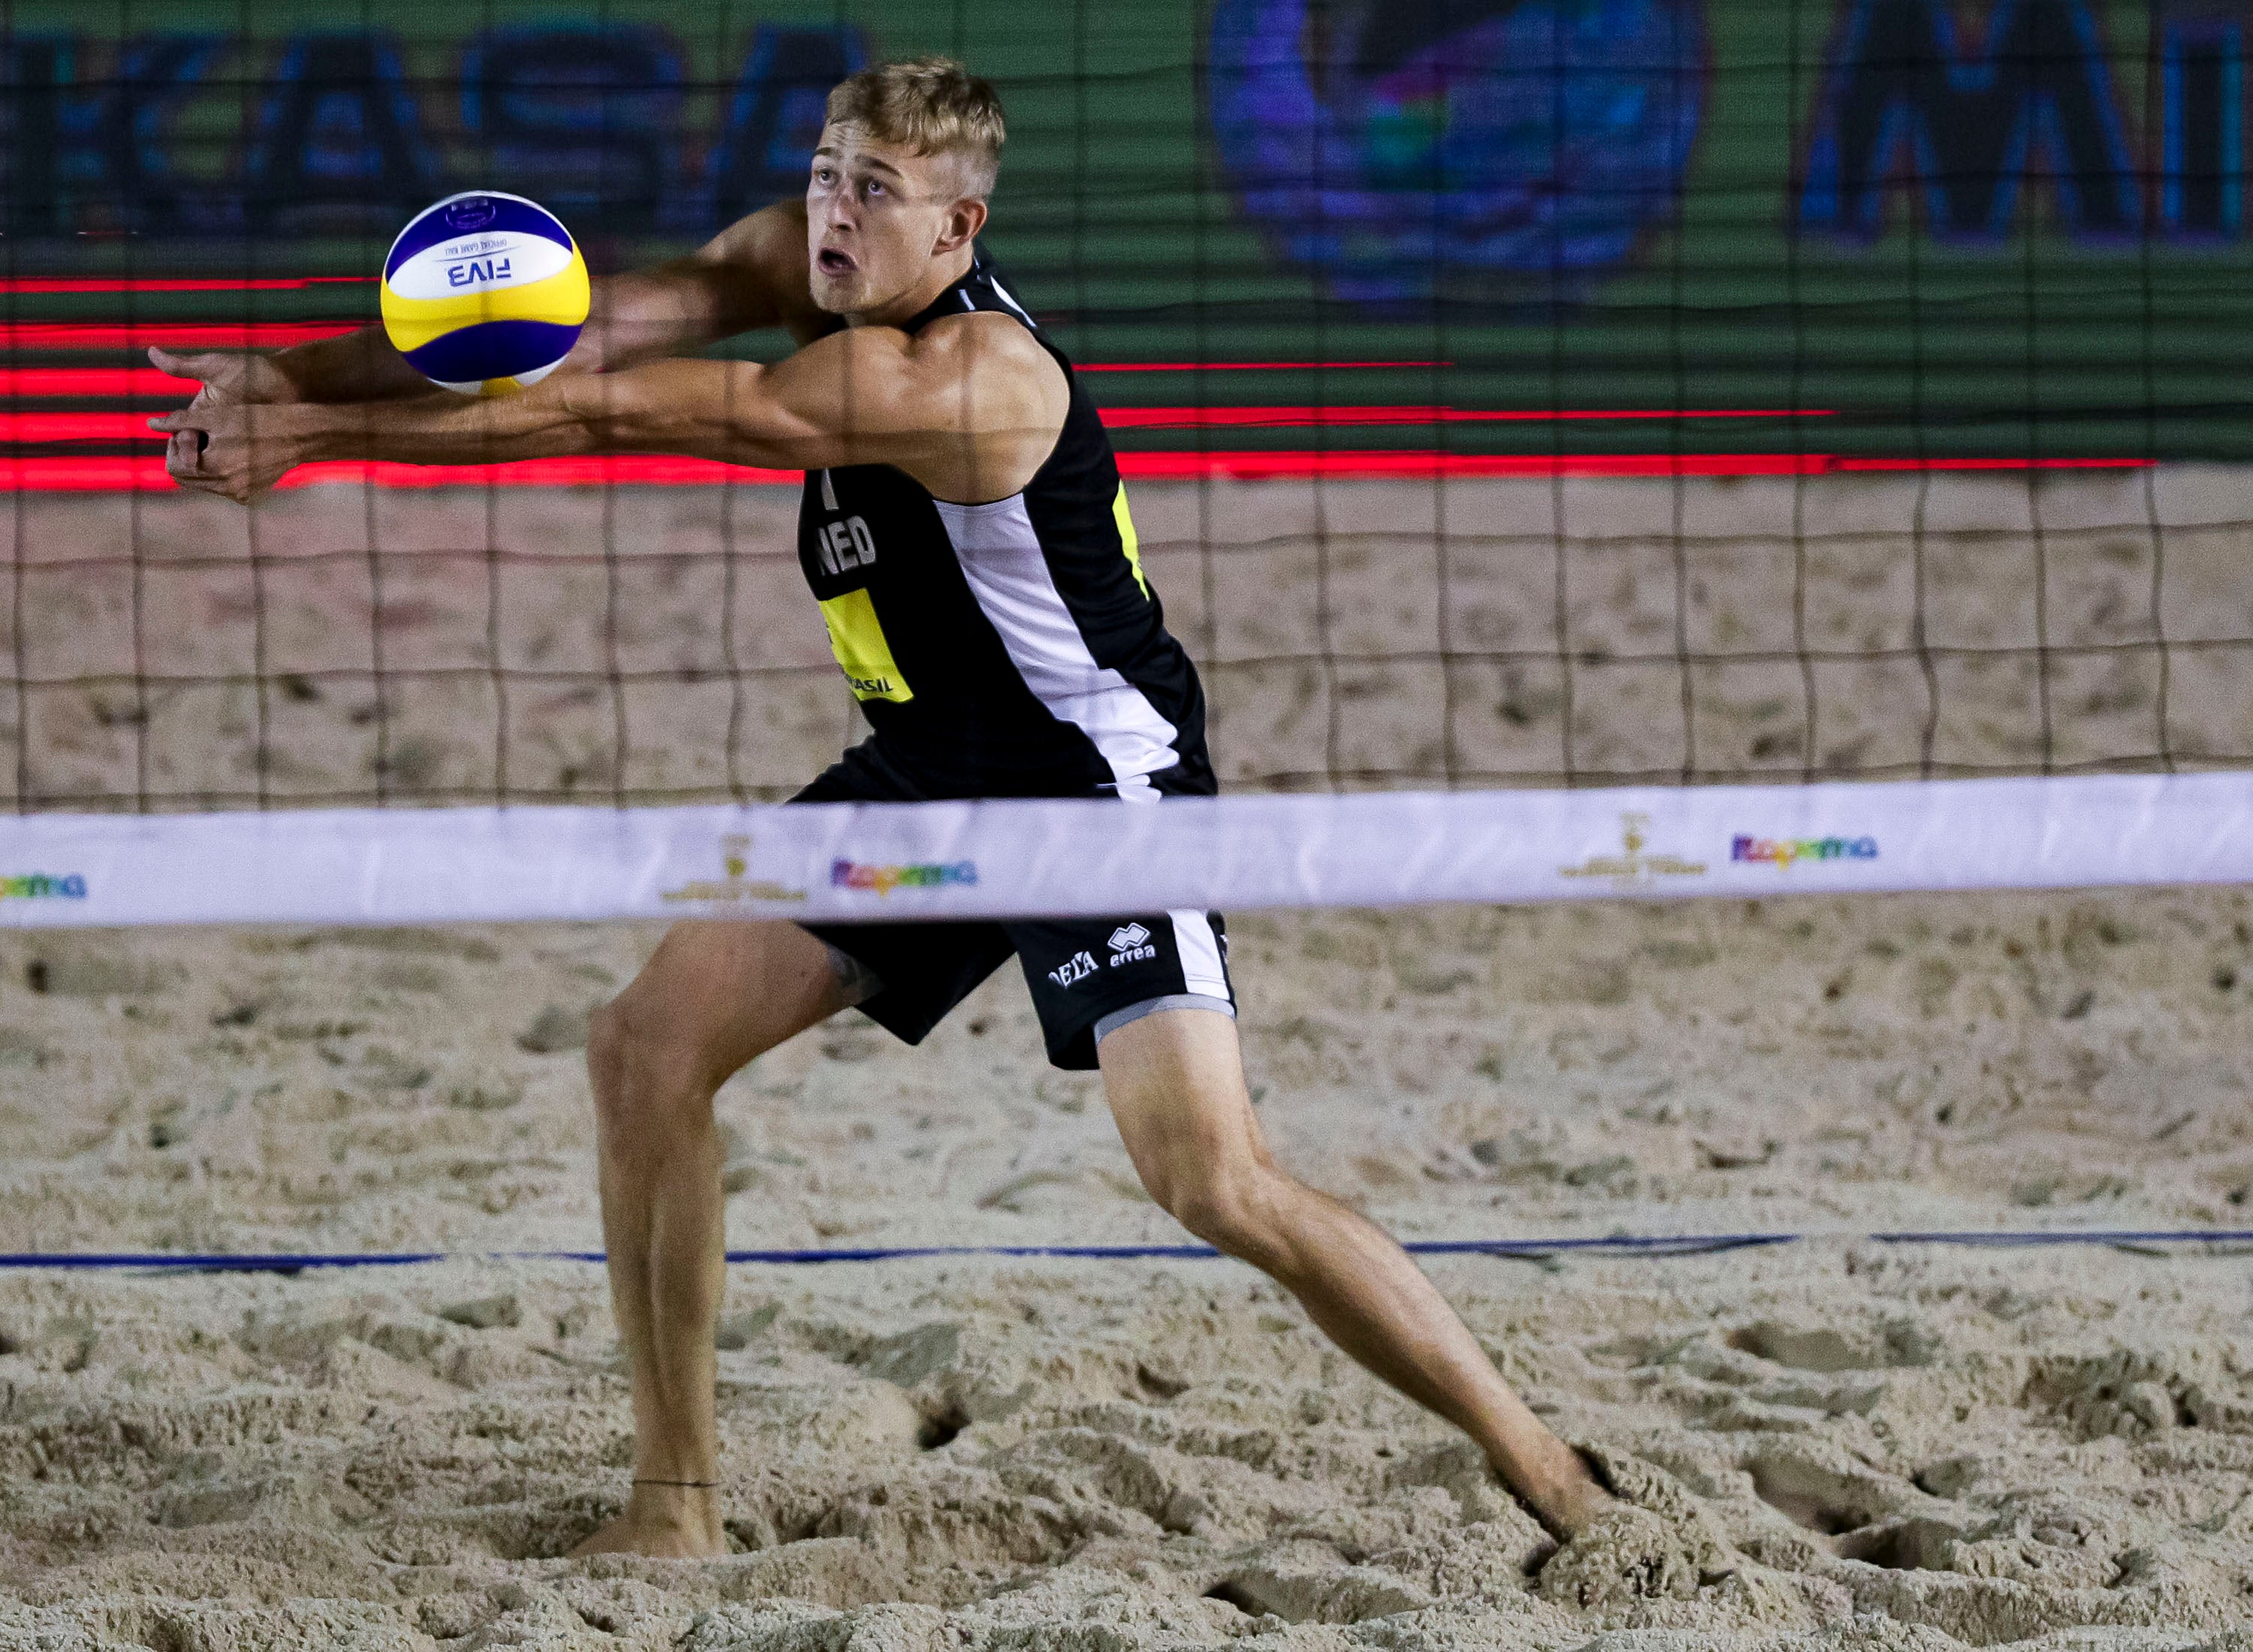 Beach volleyball player Steven van de Velde: ‘I have been branded as a sex monster, as a paedophile. That I am not – really not’